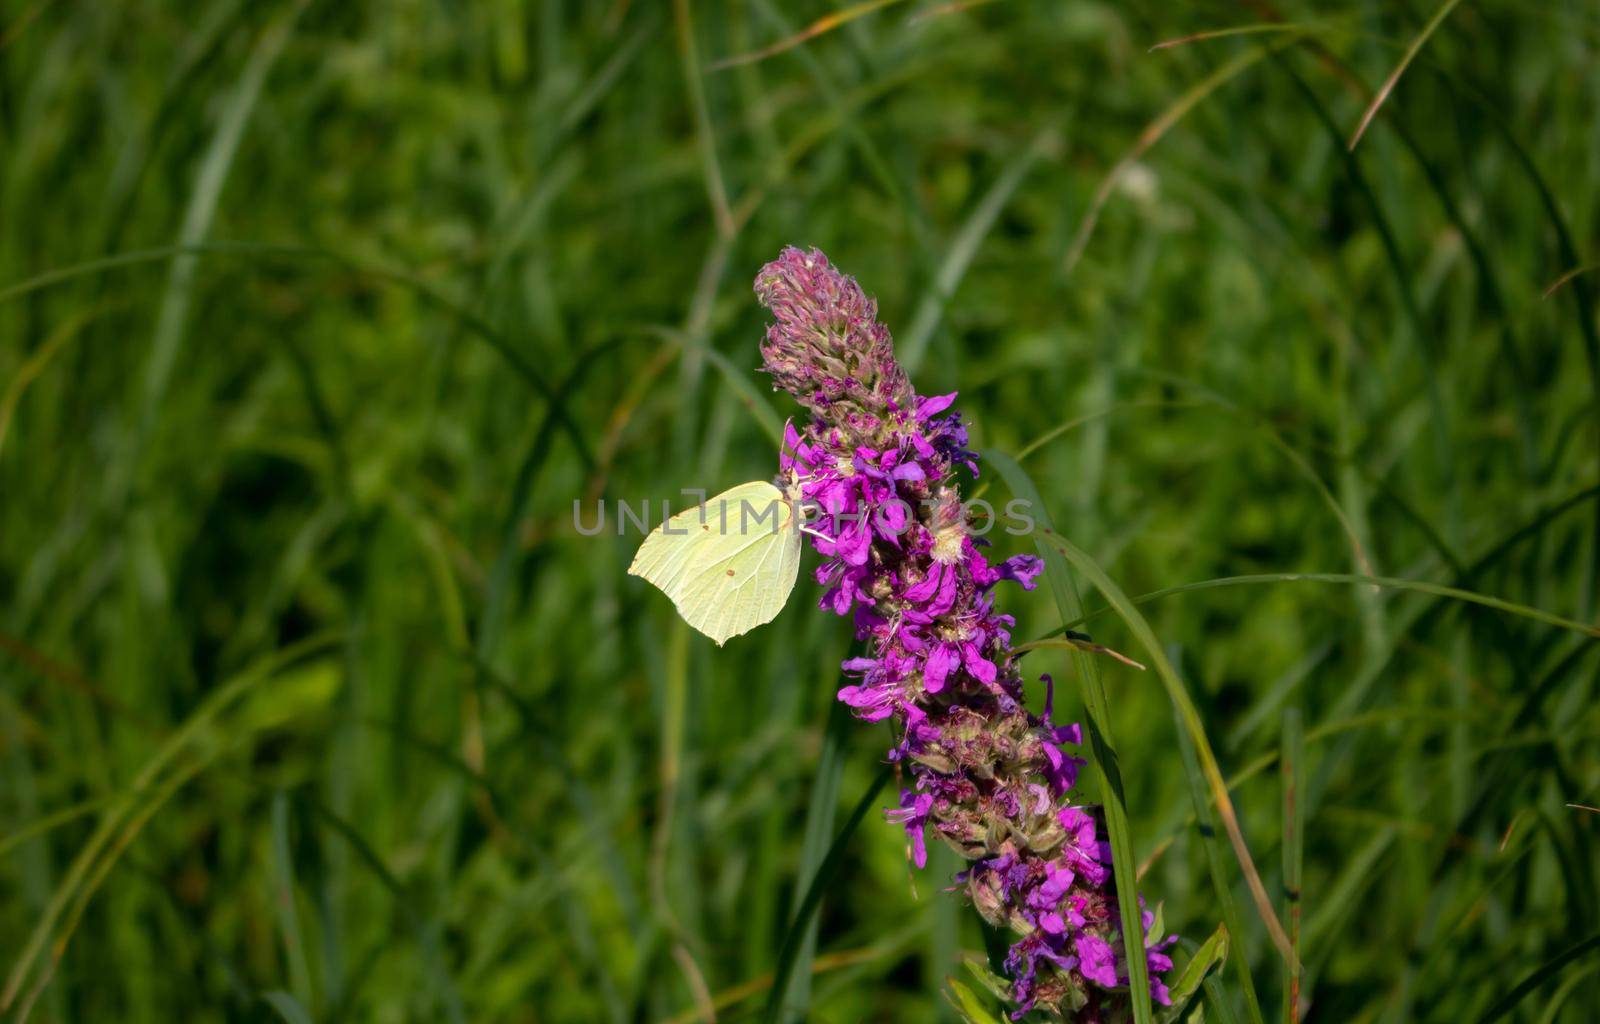 On a bright summer day, a white butterfly on a purple-lilac meadow flower.